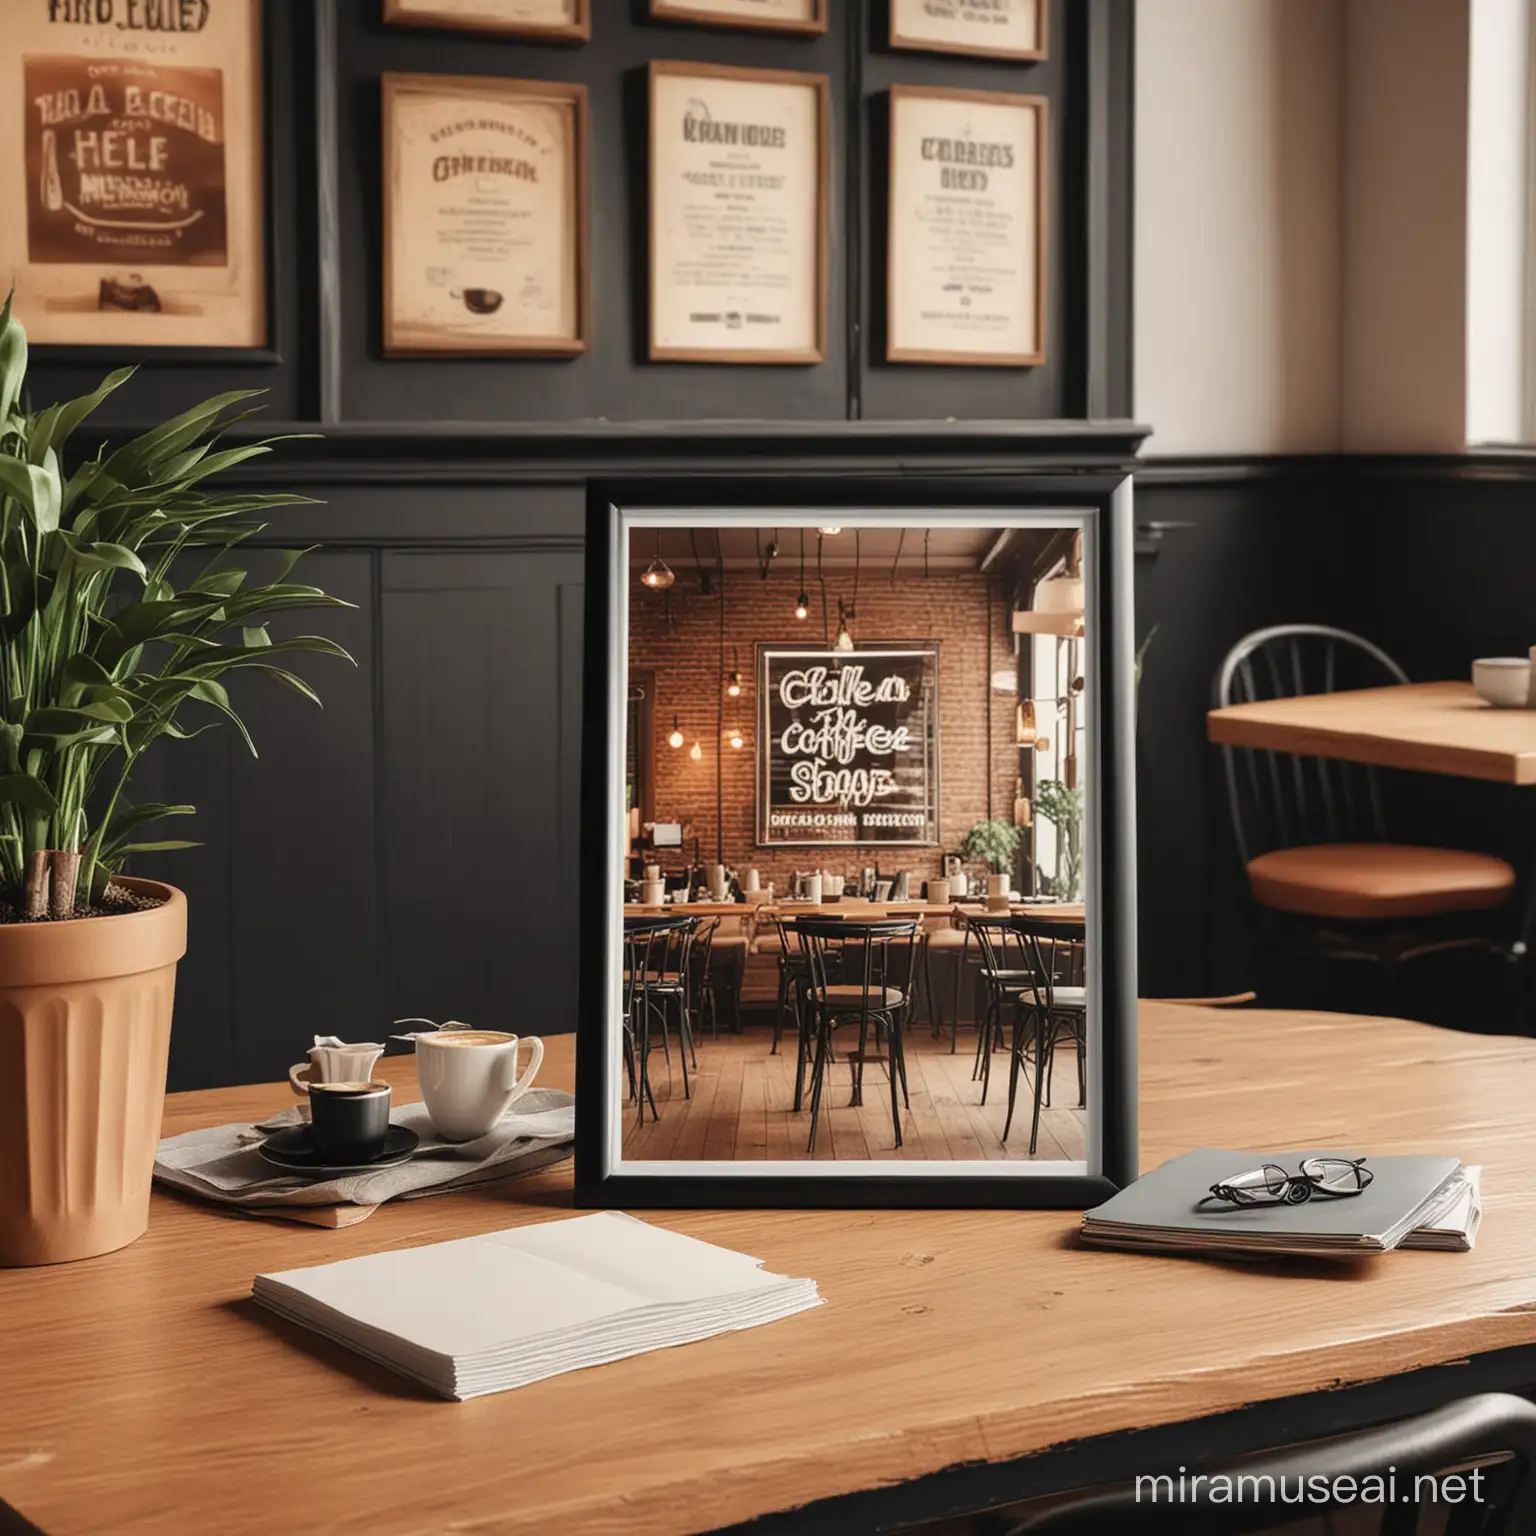 Retro Coffee Shop Table with A4 Black Frame Mockup